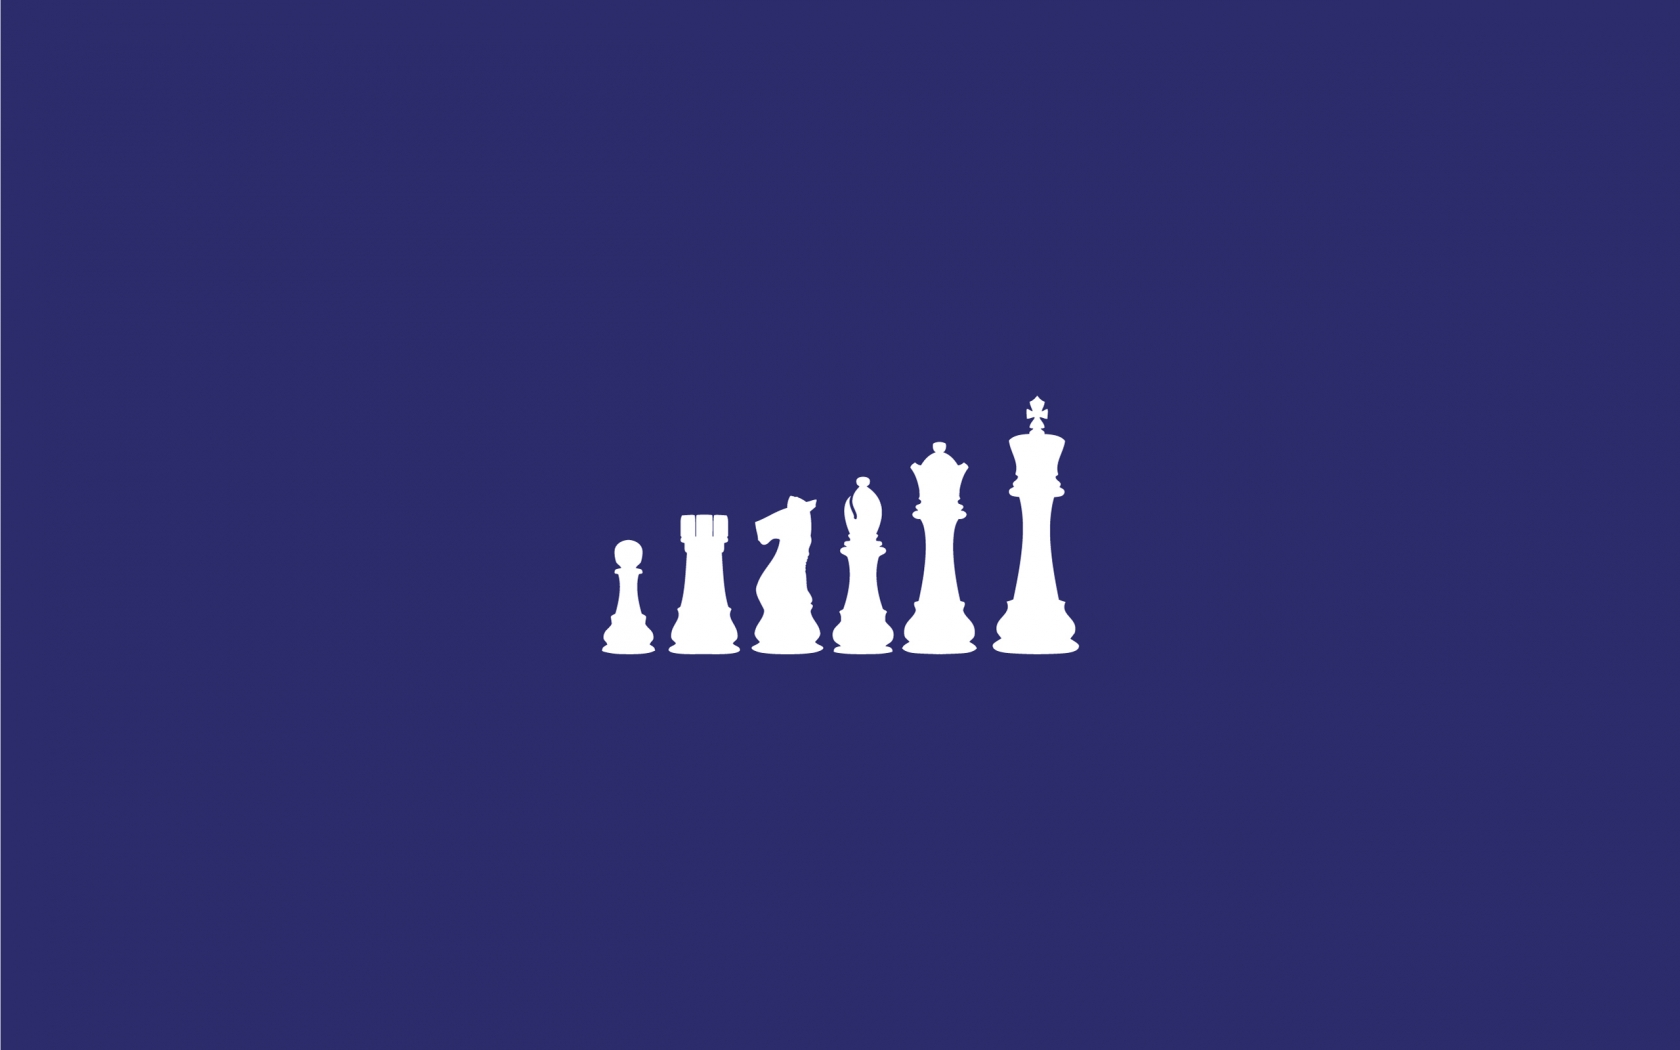 Chess Figures for 1680 x 1050 widescreen resolution